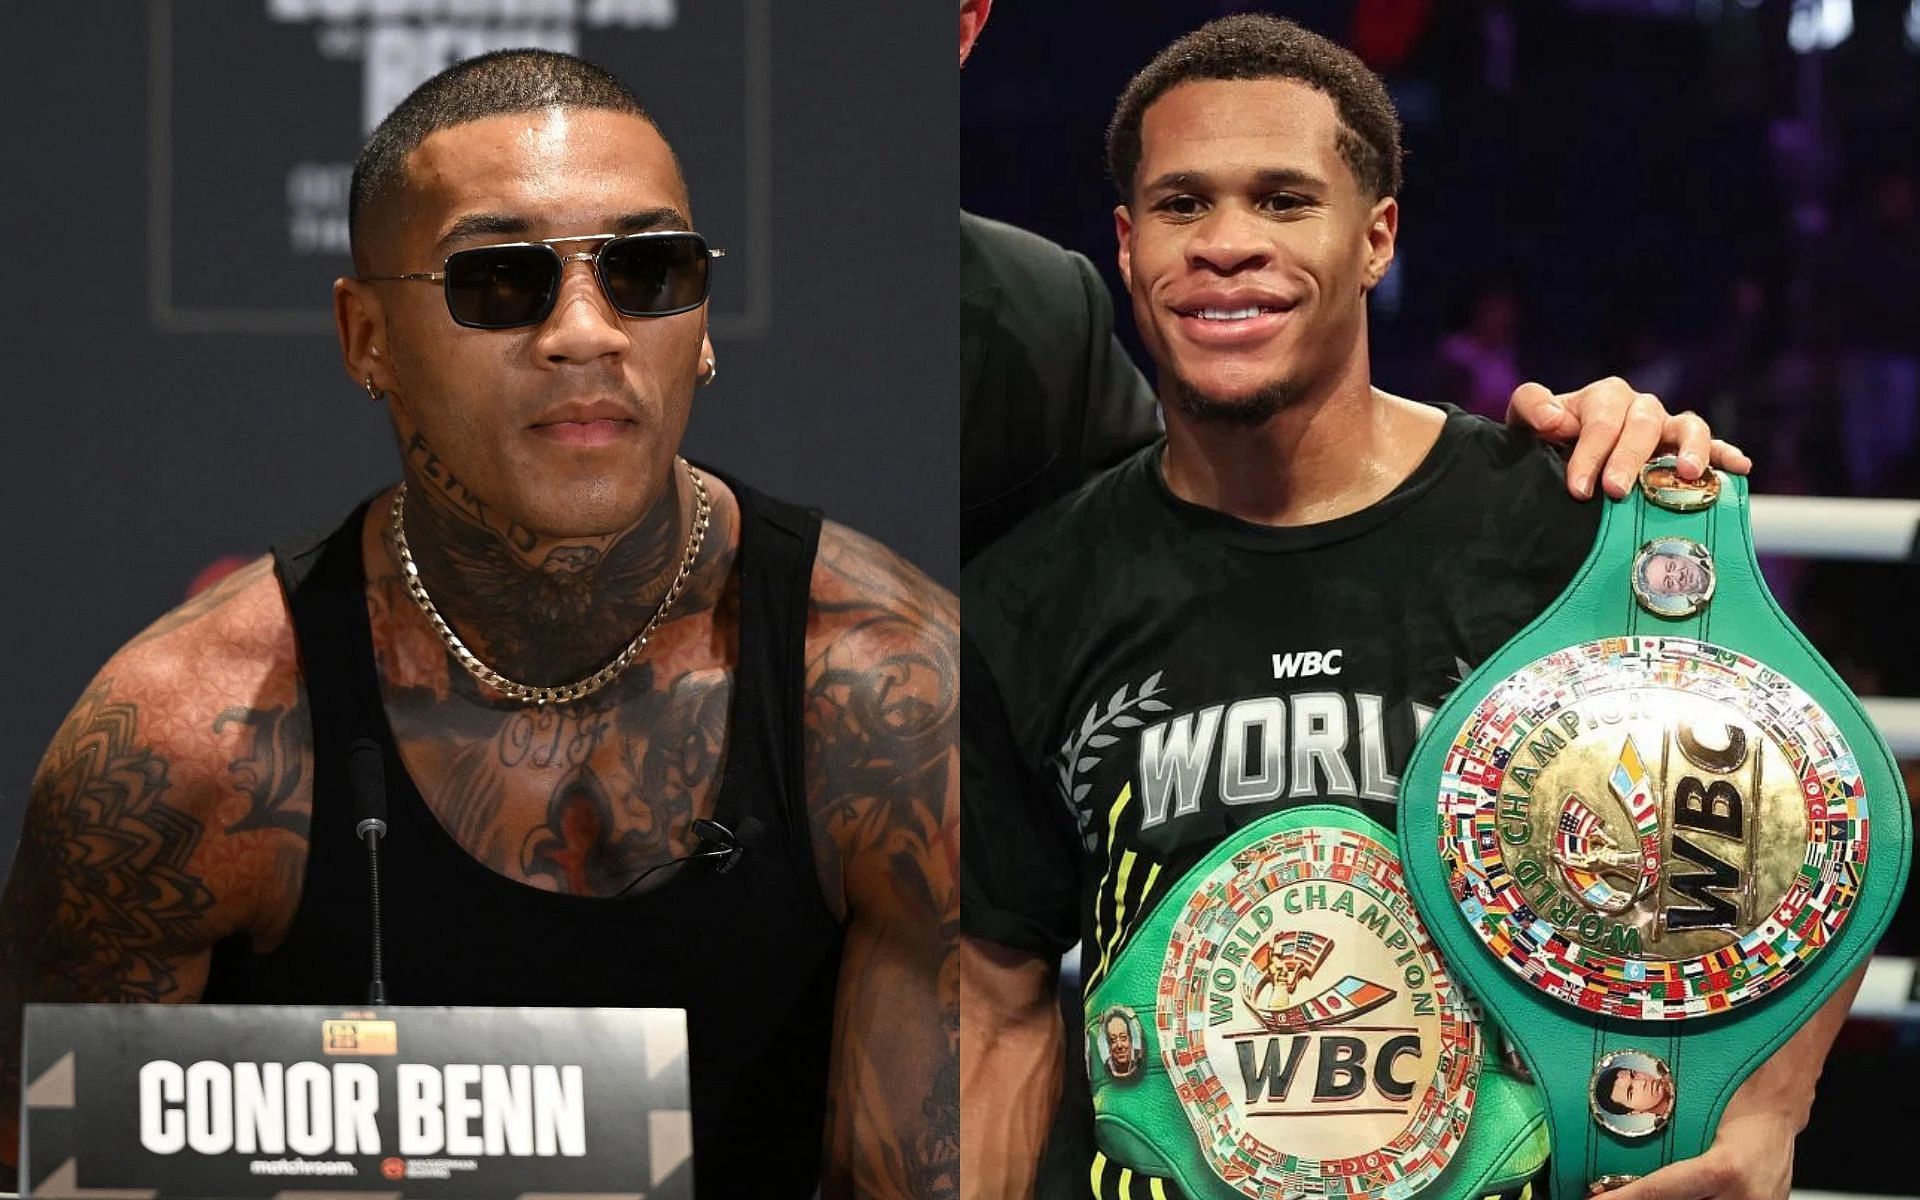 Conor Benn (left) sends a strong message to Devin Haney (right) after his &quot;disrespectful&quot; comments [Images Courtesy: @GettyImages]